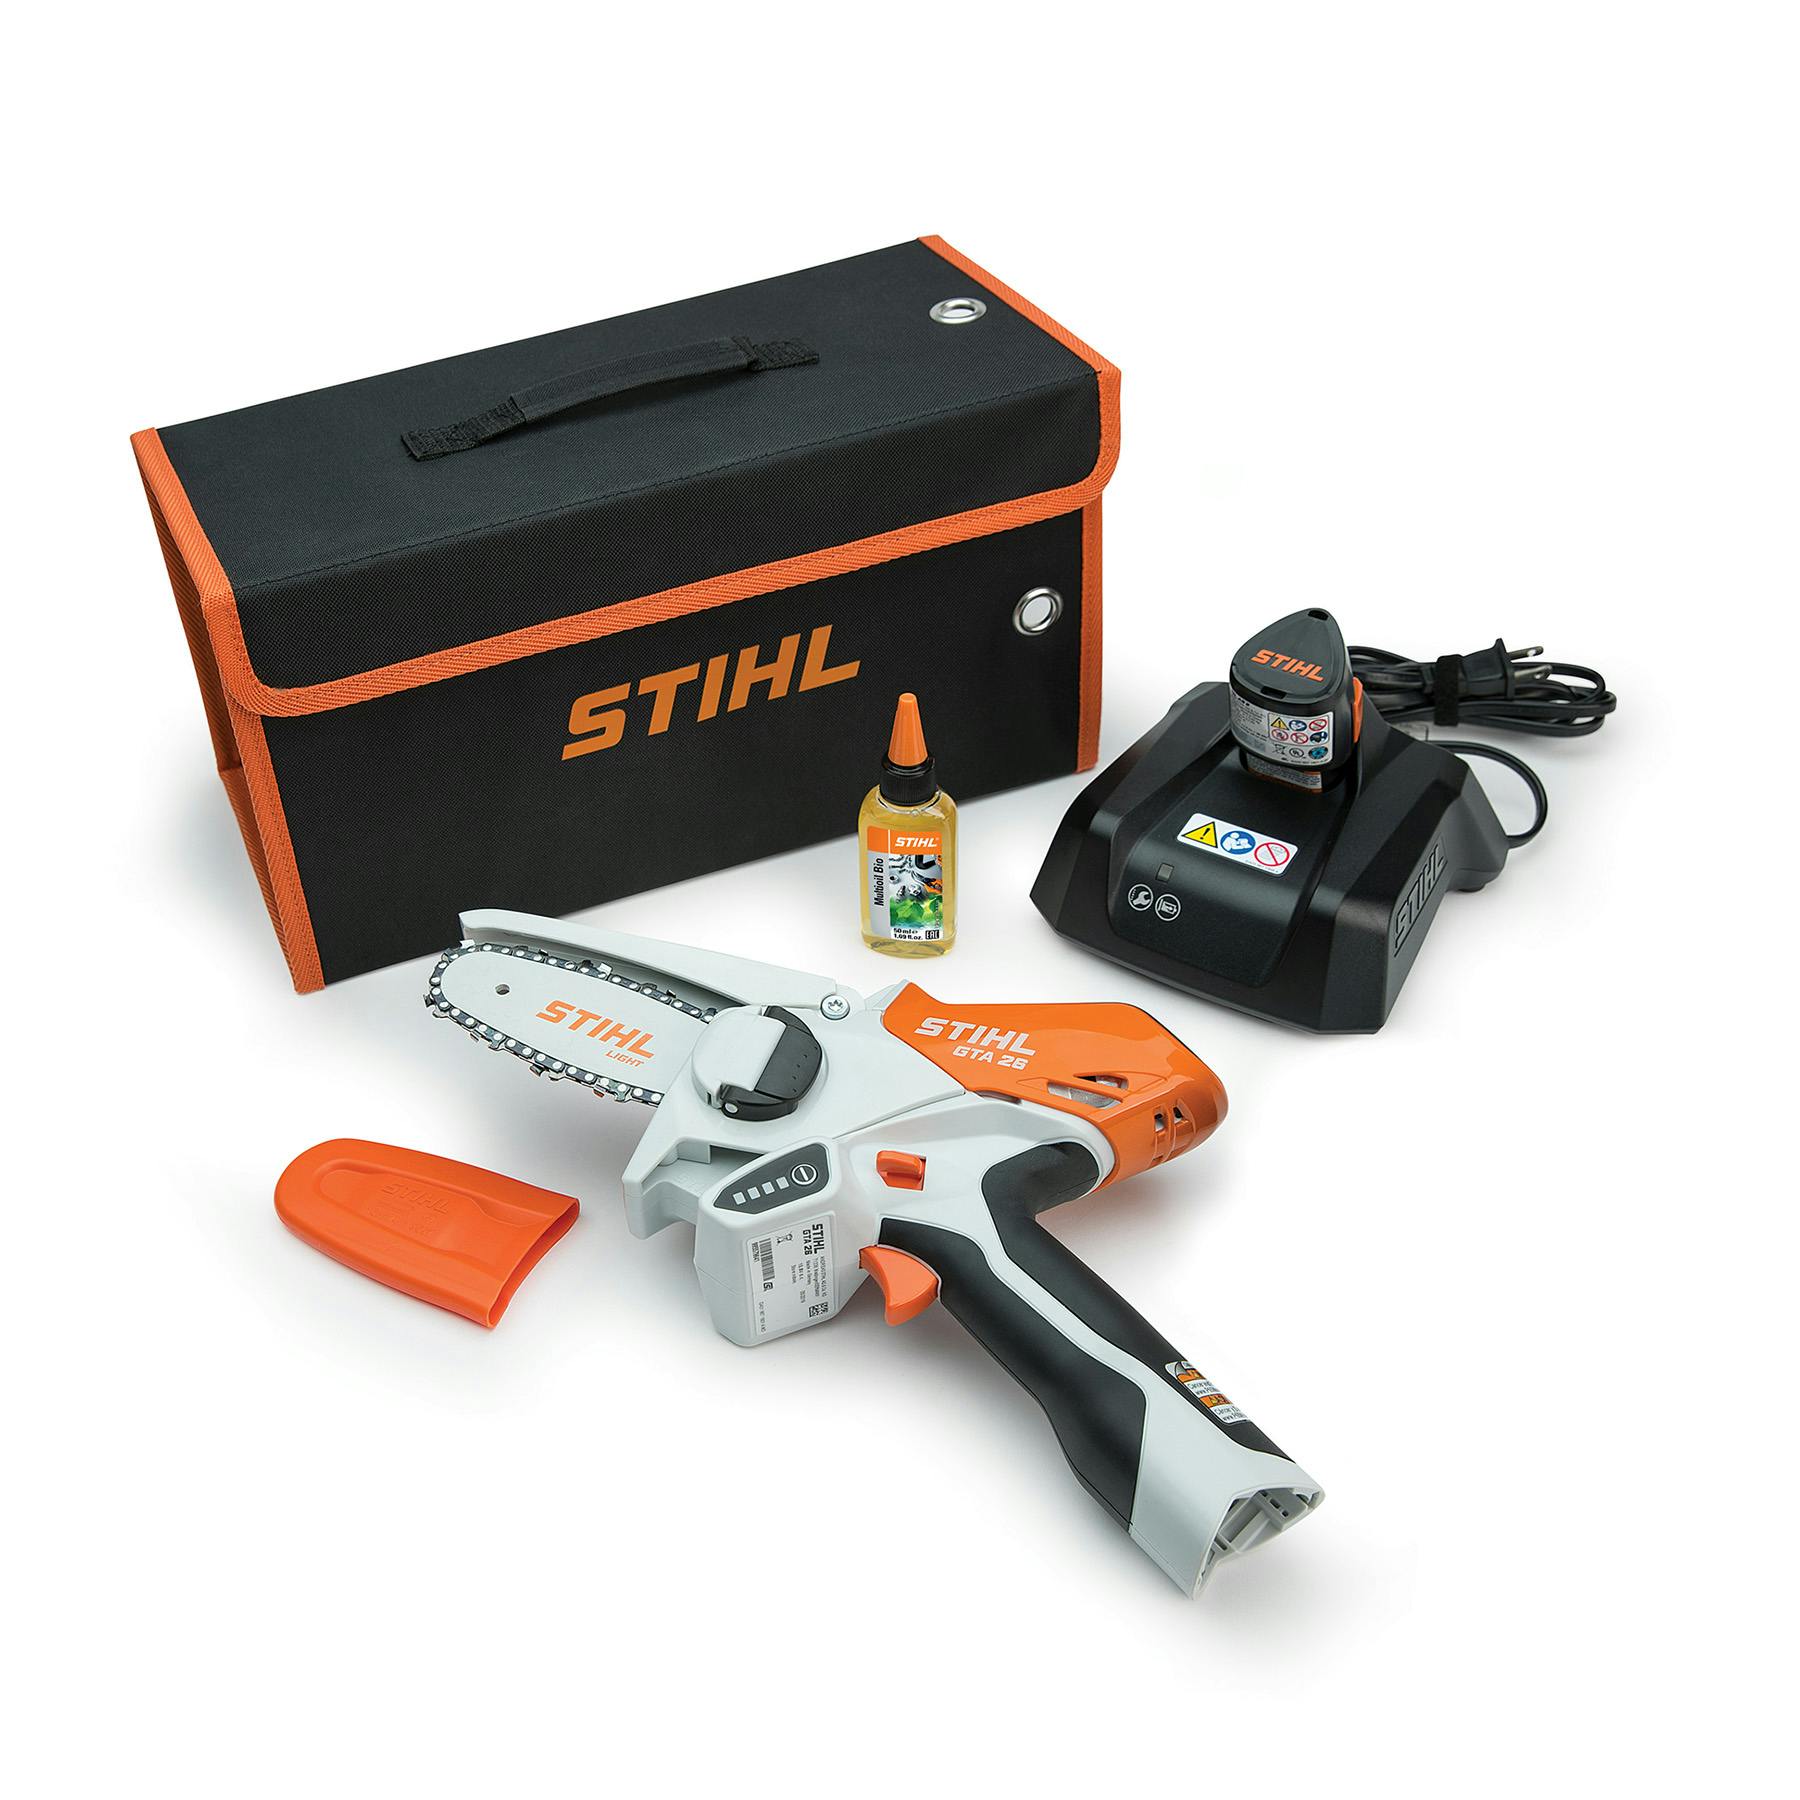 STIHL GTA 26 Handheld Pruner Chainsaw Battery Powered  w/ carry case accessories 